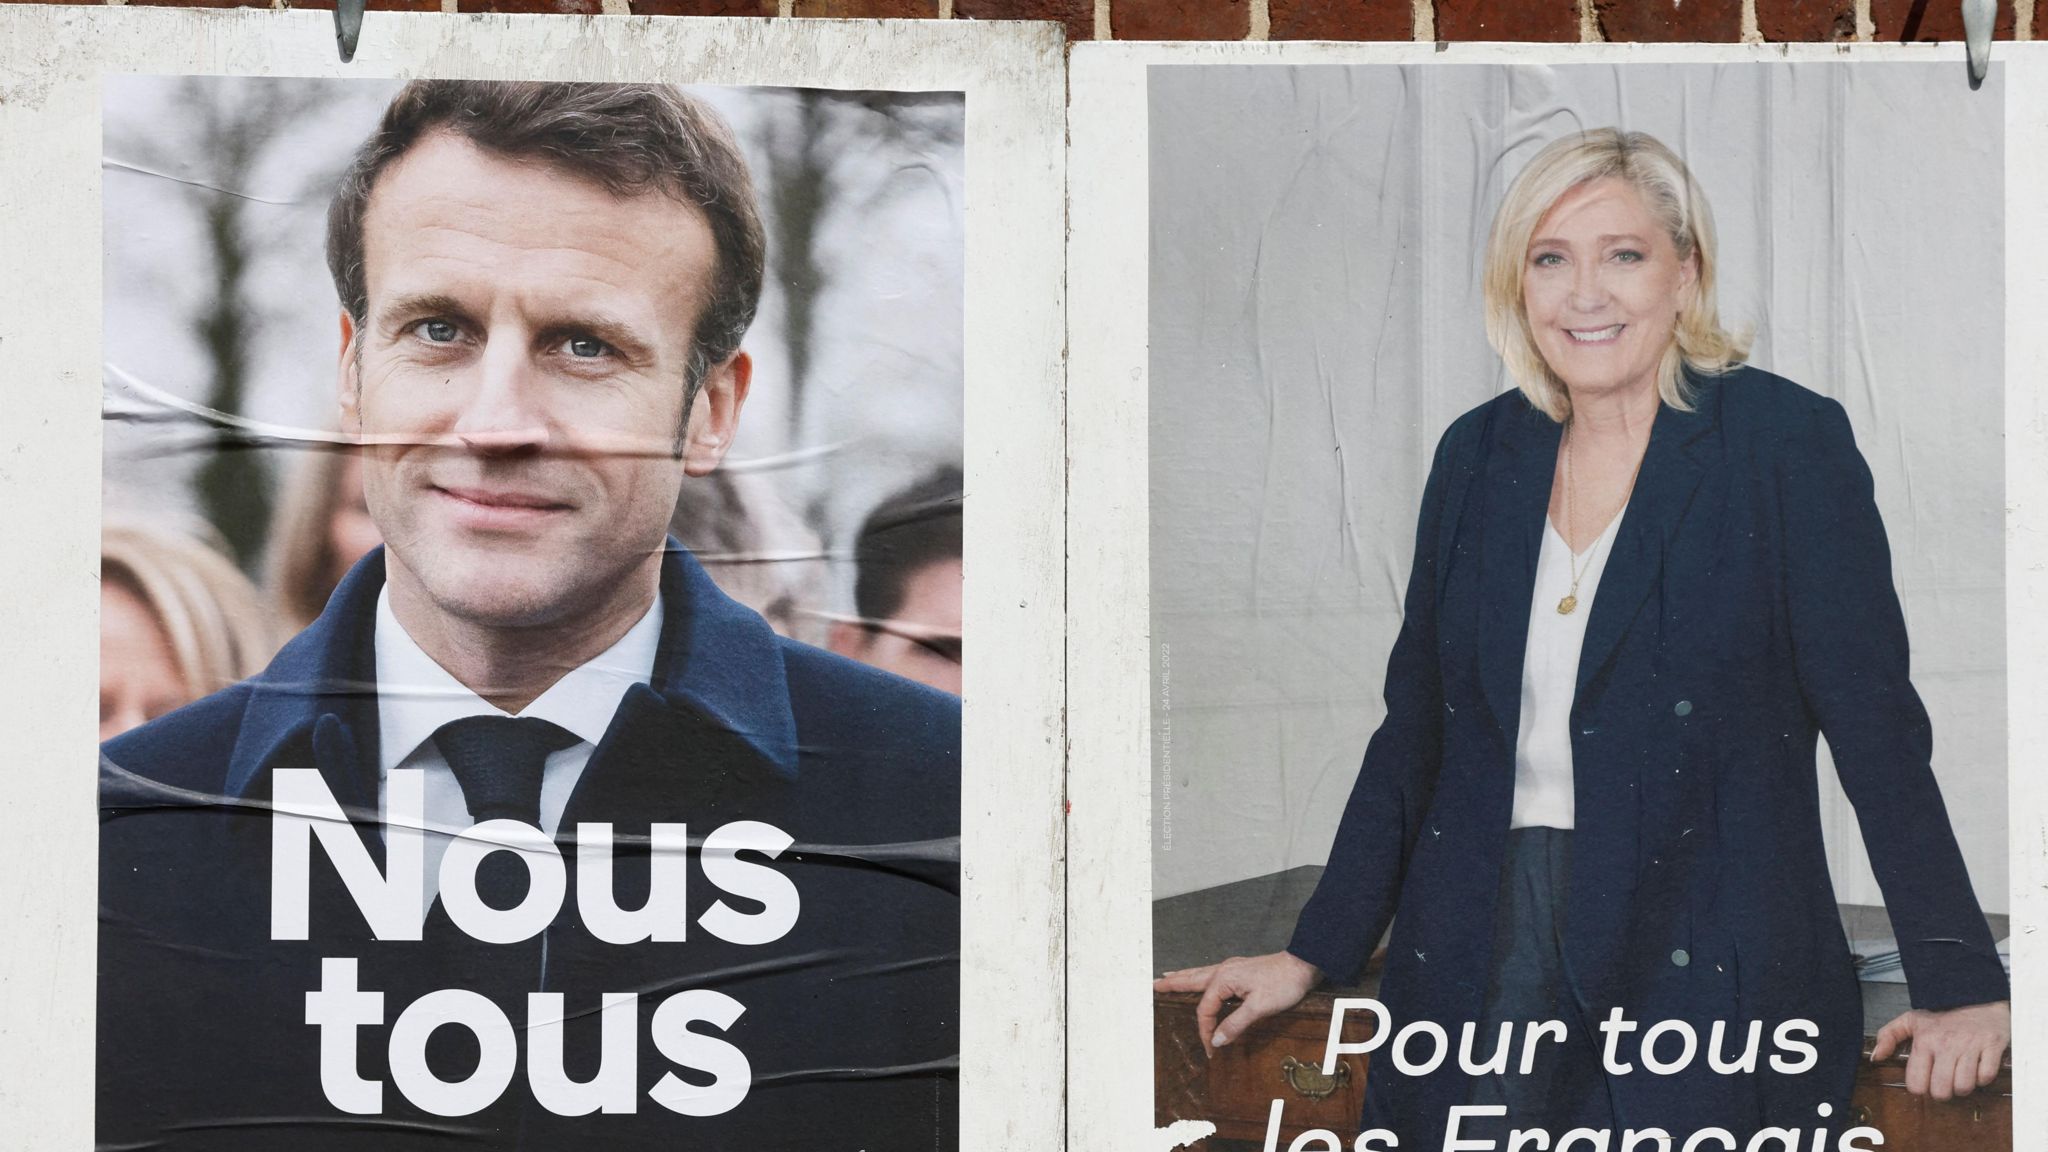 Official campaign posters of French presidential election candidates Marine le Pen, leader of French far-right National Rally (Rassemblement National) party, and French President Emmanuel Macron, 